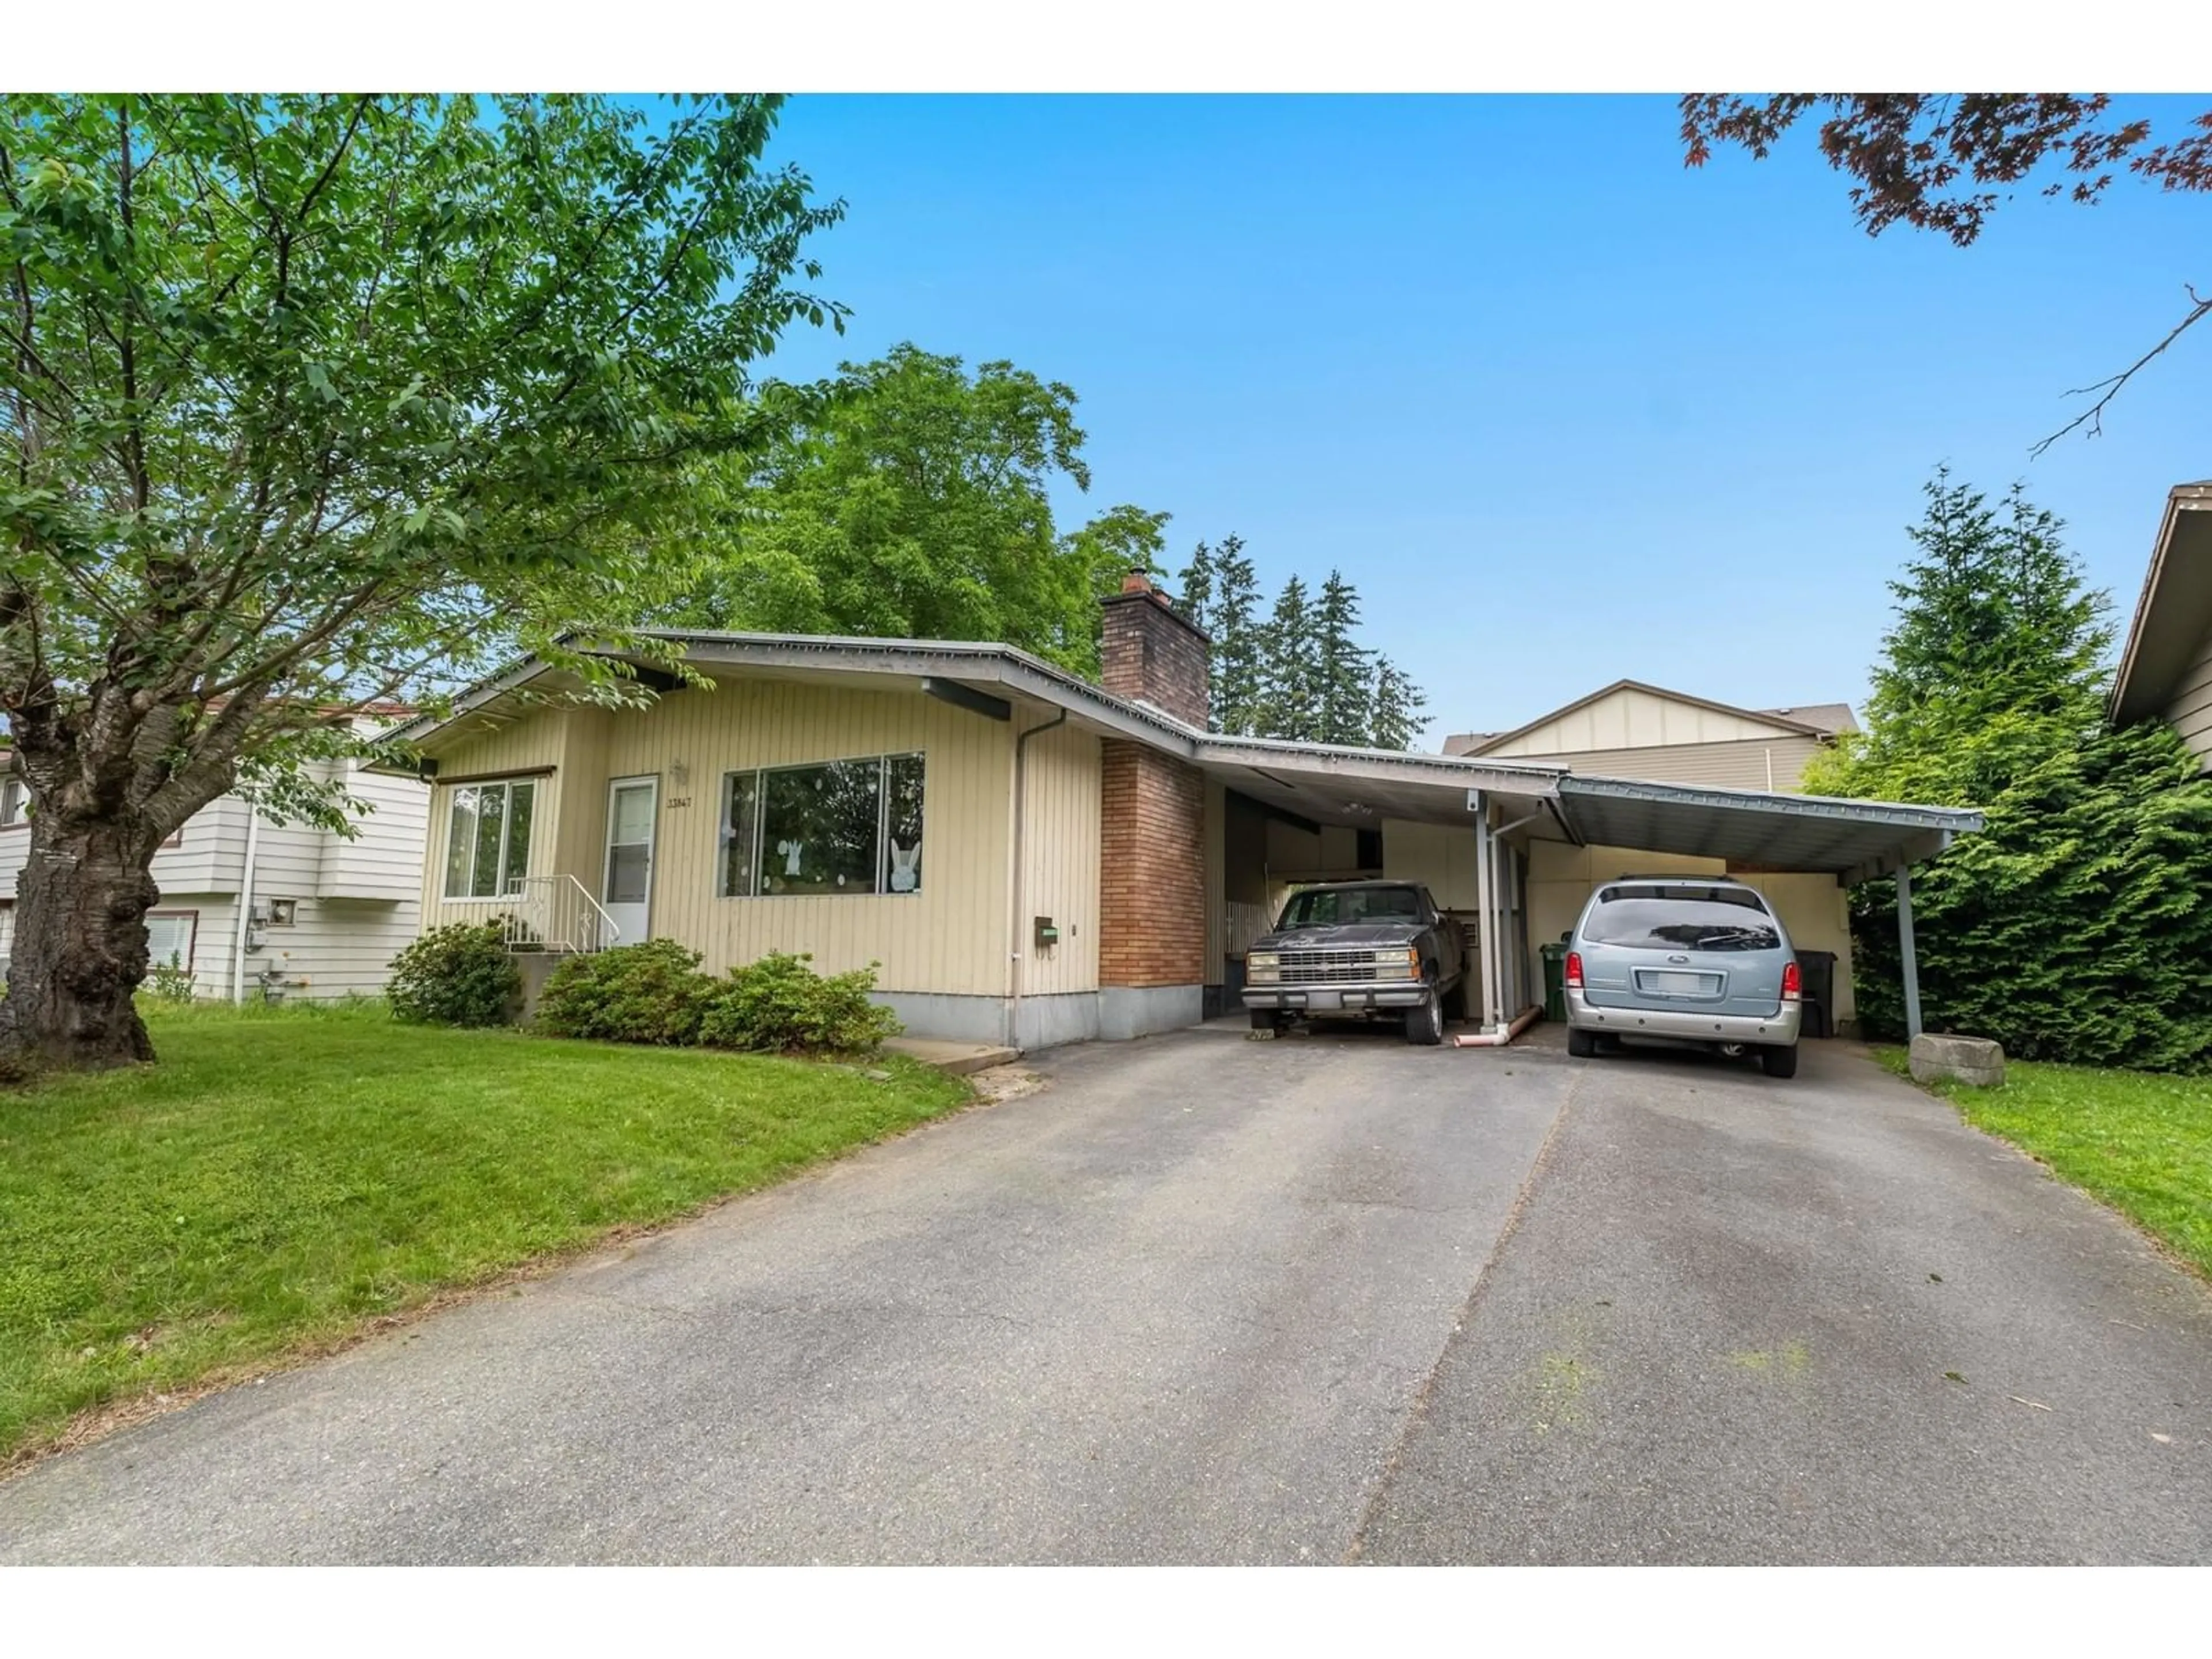 Frontside or backside of a home for 33847 FERN STREET, Abbotsford British Columbia V2S1G4